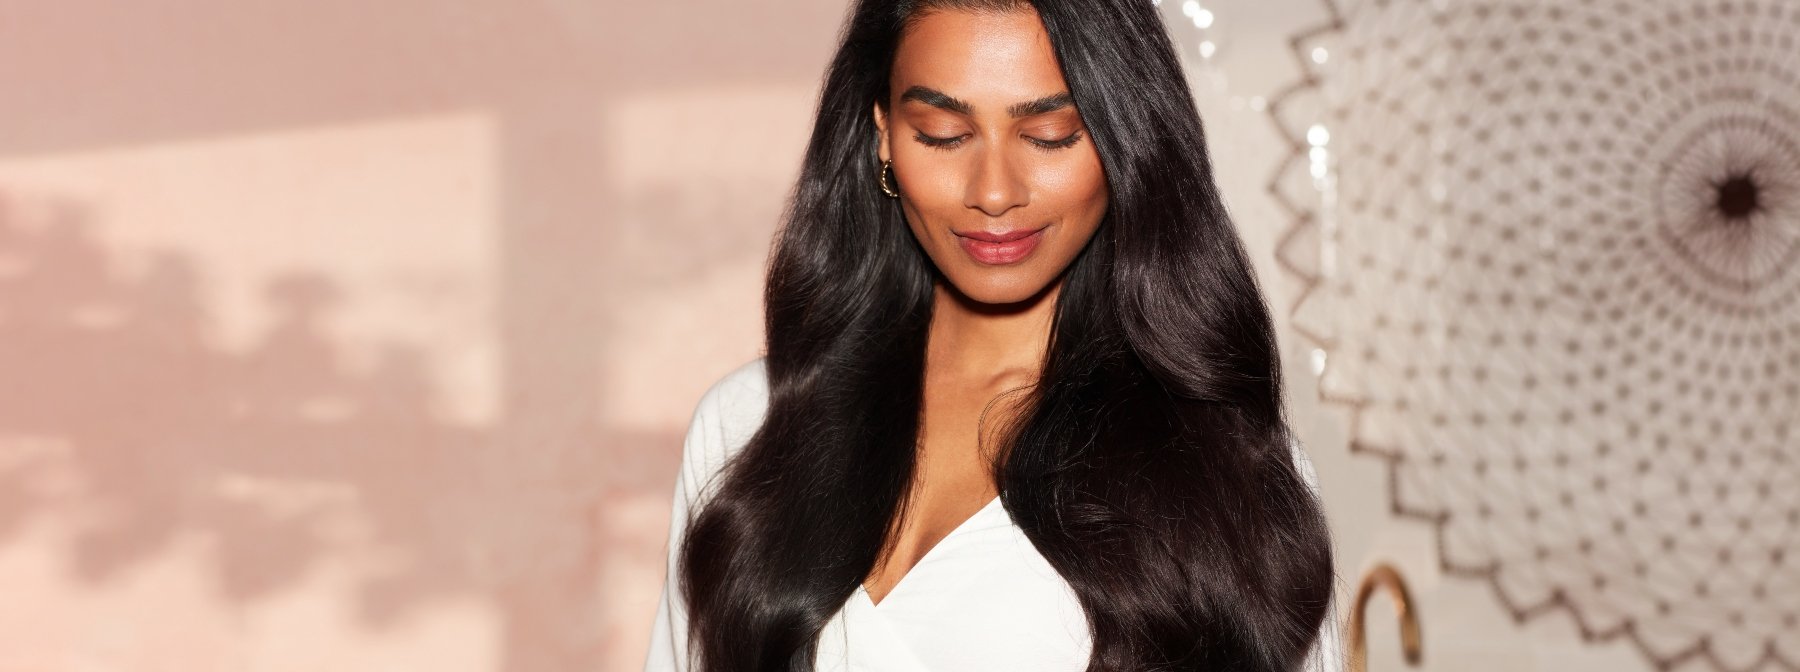 woman with healthy silky hair